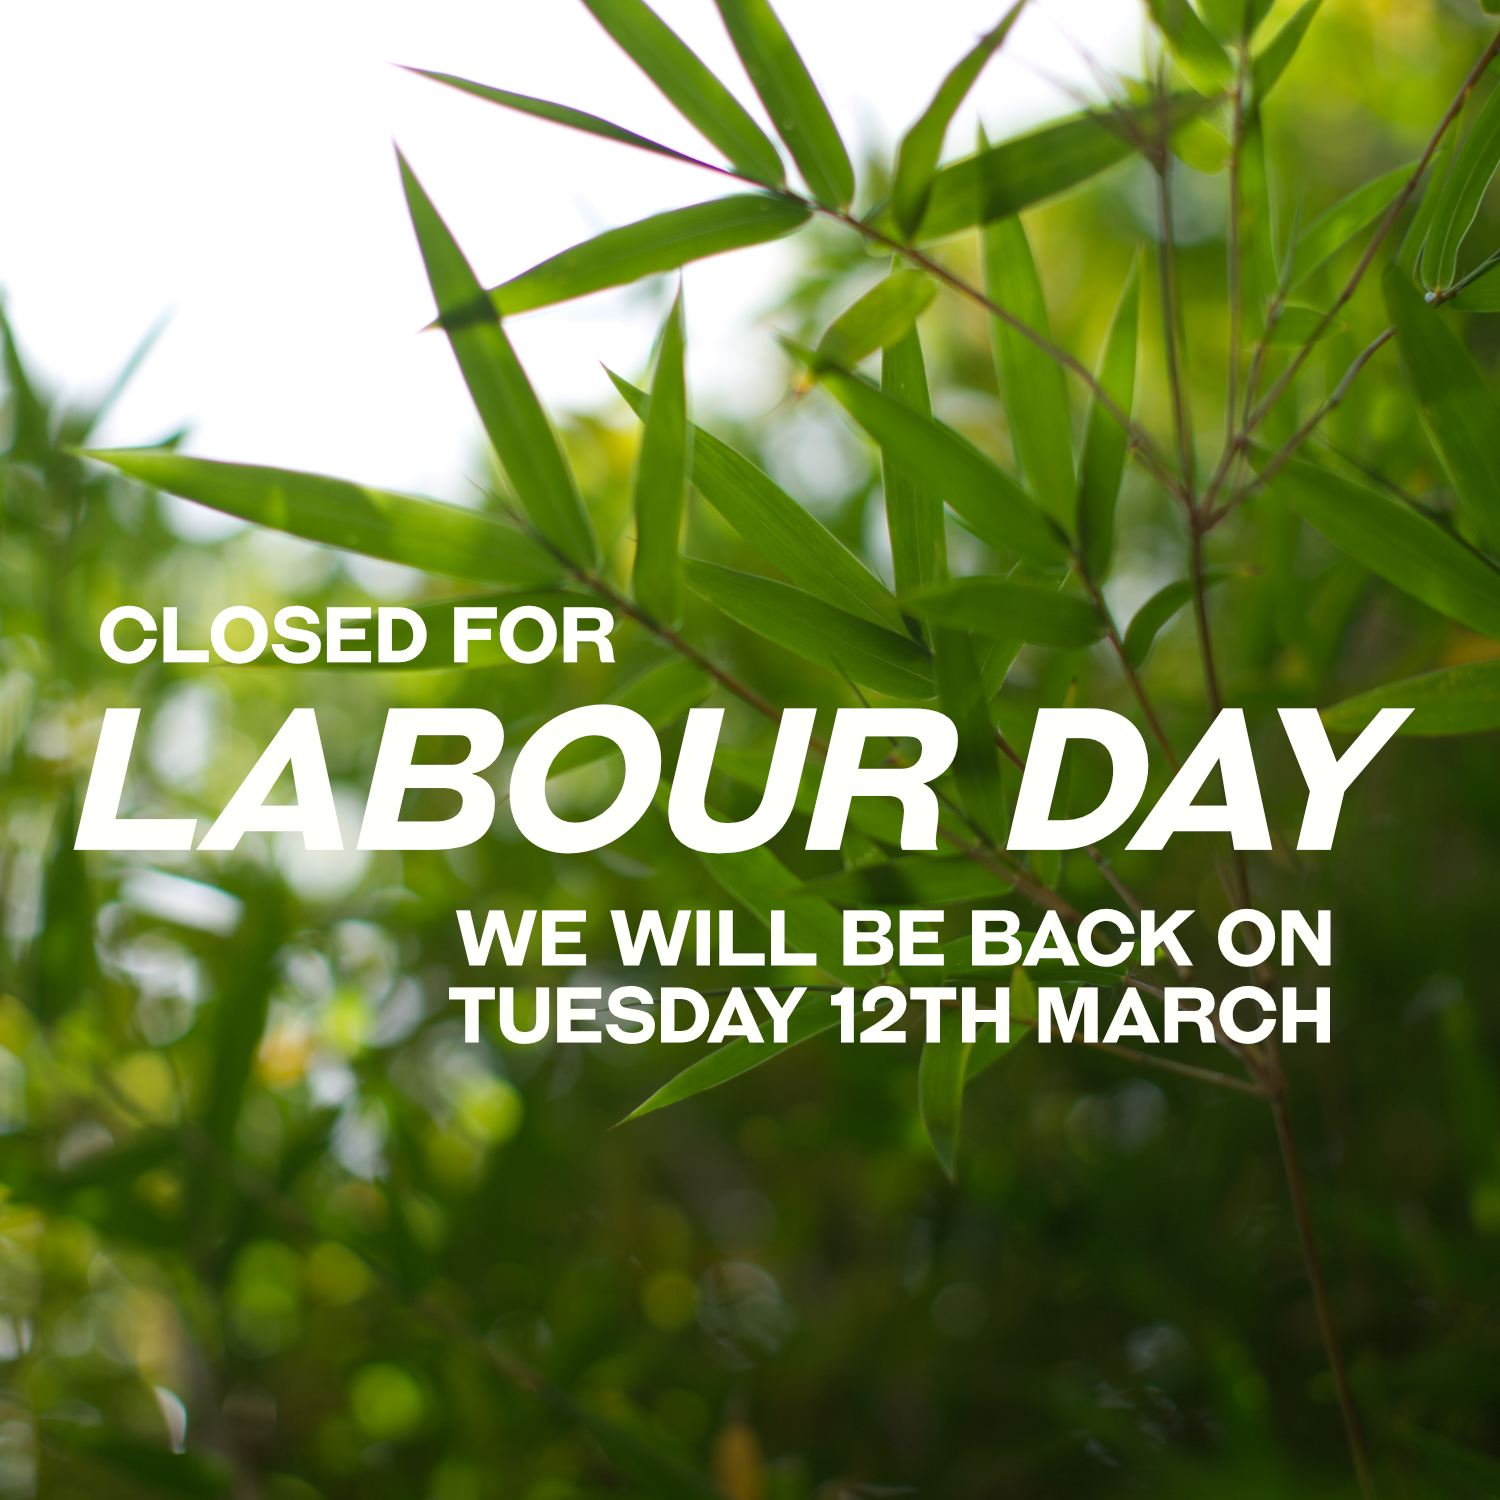 🌿 We're taking a break today, but it's the perfect time for some planting. 🌱 Bamboo loves the heat, and will establish quickly through Autumn. Get your hands dirty and enjoy the greenery! 🍃🎋 

We will re-open on Tuesday the 12th of March at 8.30am.

#LaborDay #PlantingTime #bamboolove #melbourne #moomba #landscape #gardening #bamboo